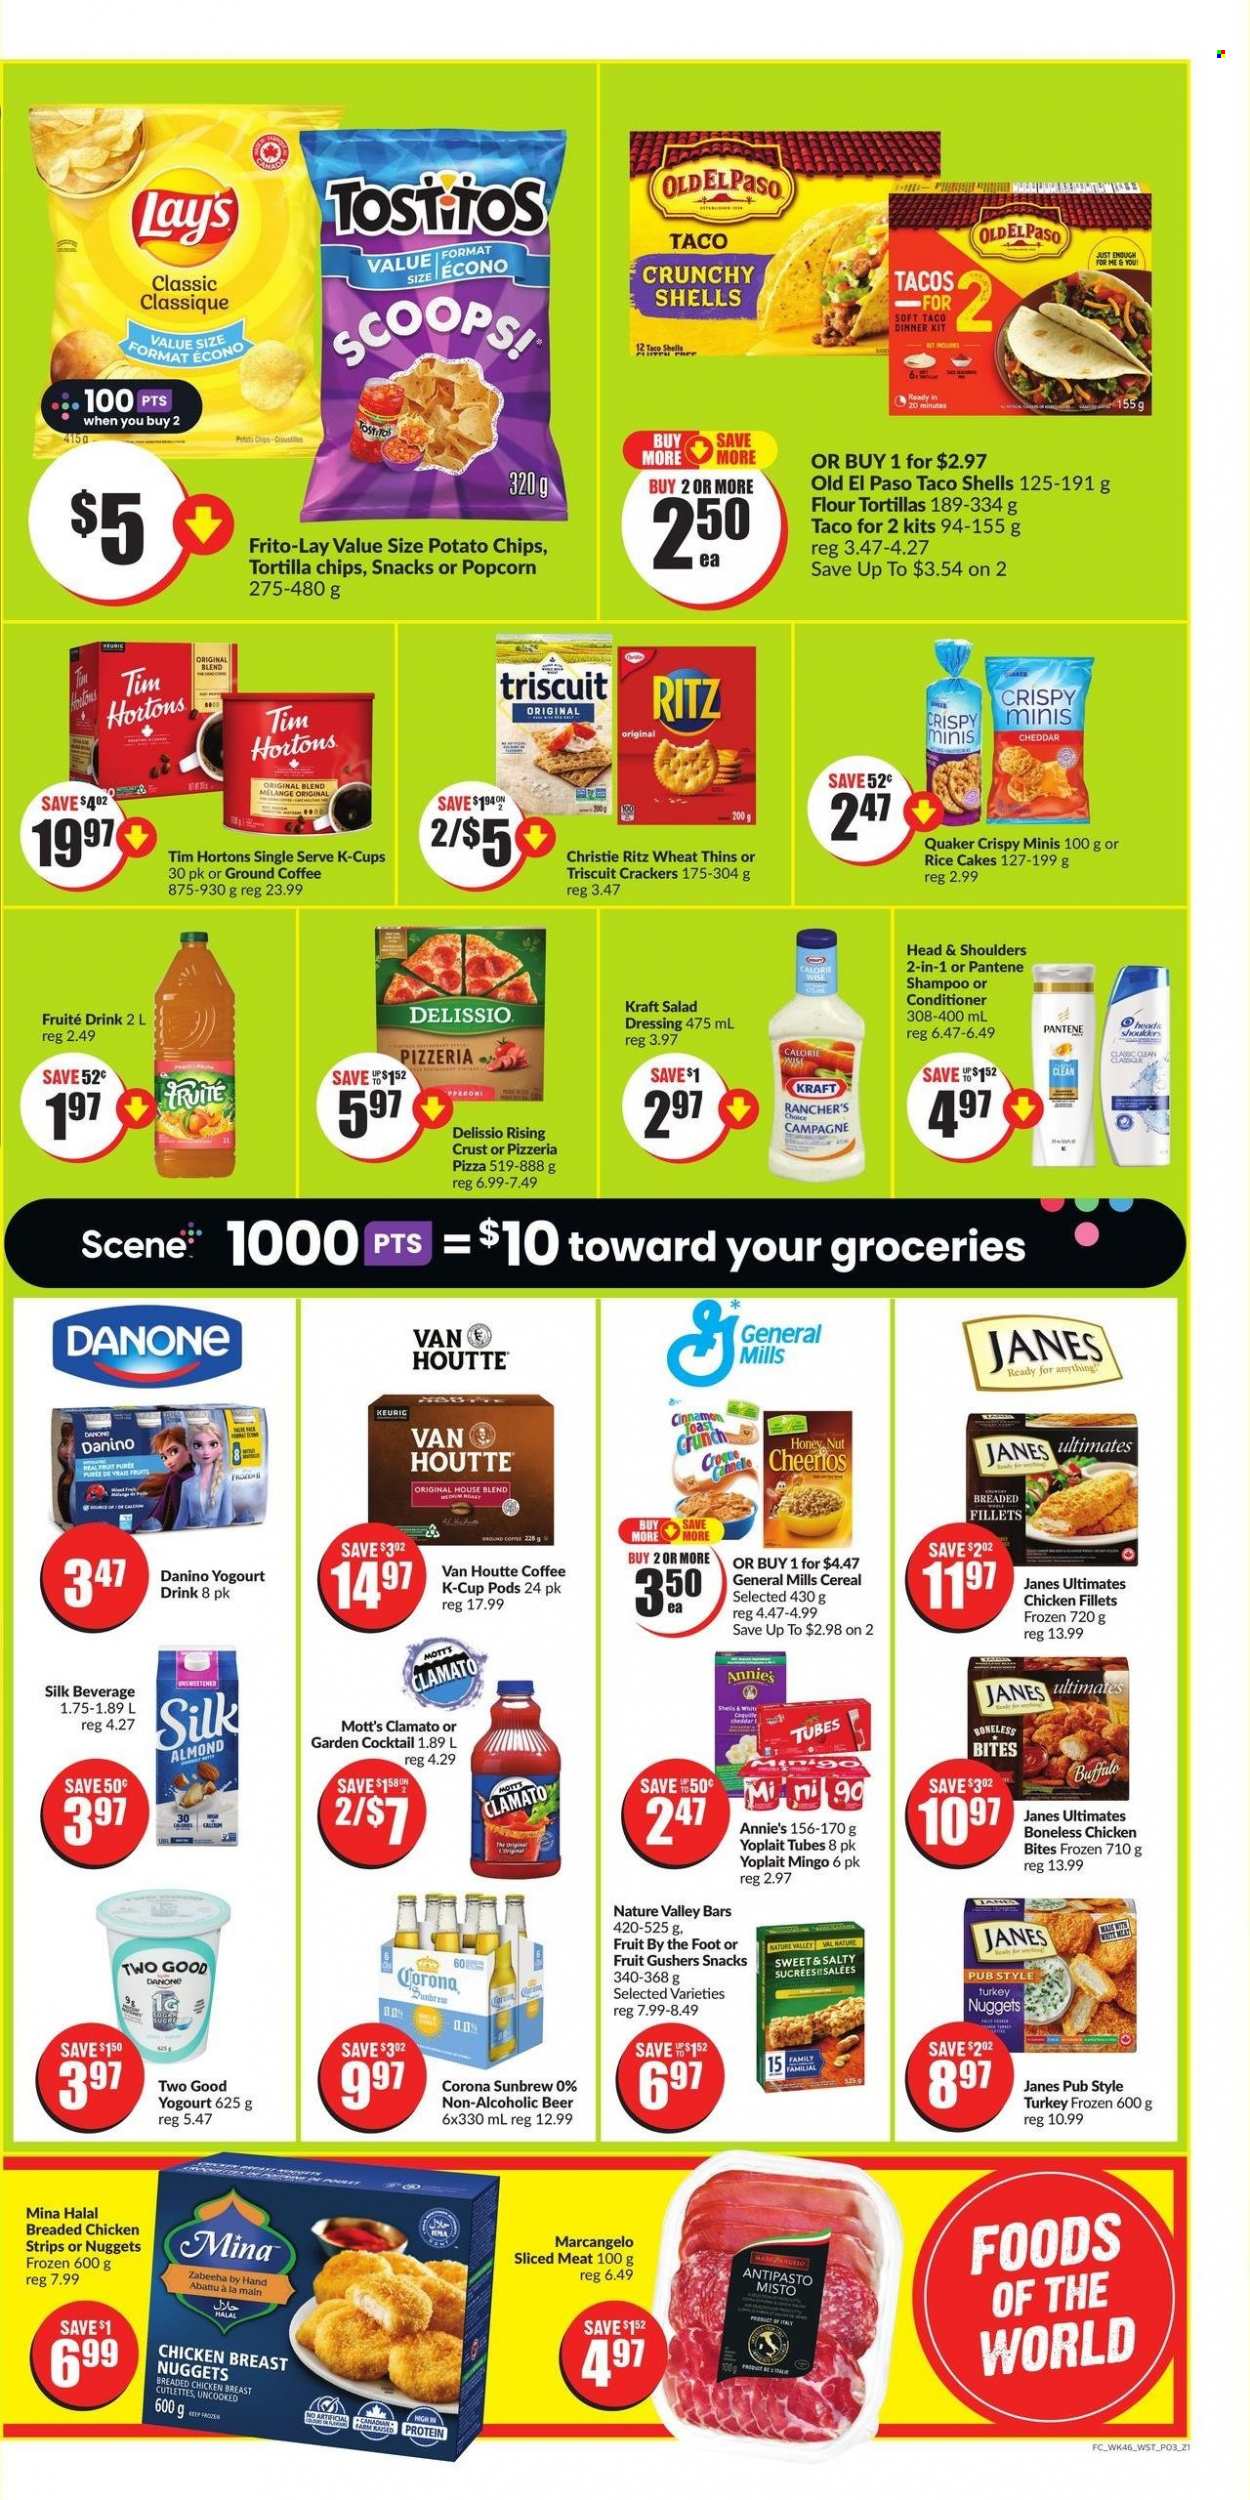 thumbnail - FreshCo. Flyer - March 16, 2023 - March 22, 2023 - Sales products - tortillas, cake, Old El Paso, tacos, Ace, flour tortillas, rice cakes, snack, Mott's, nuggets, chicken nuggets, dinner kit, chicken bites, Quaker, chicken strips, Annie's, Kraft®, ready meal, breaded chicken, salami, ham, chicken breasts, sliced meat, antipasti, cheese, yoghurt, Yoplait, Silk, strips, cereal bar, crackers, fruit snack, RITZ, General Mills, bars, tortilla chips, potato chips, Lay’s, Thins, popcorn, Frito-Lay, rice crisps, salty snack, cereals, Cheerios, Nature Valley, salad dressing, dressing, tomato juice, Clamato, vegetable juice, coffee, ground coffee, coffee capsules, K-Cups, Corona Extra, non-alcoholic beer, turkey, chicken fillet, shampoo, Danone. Page 3.